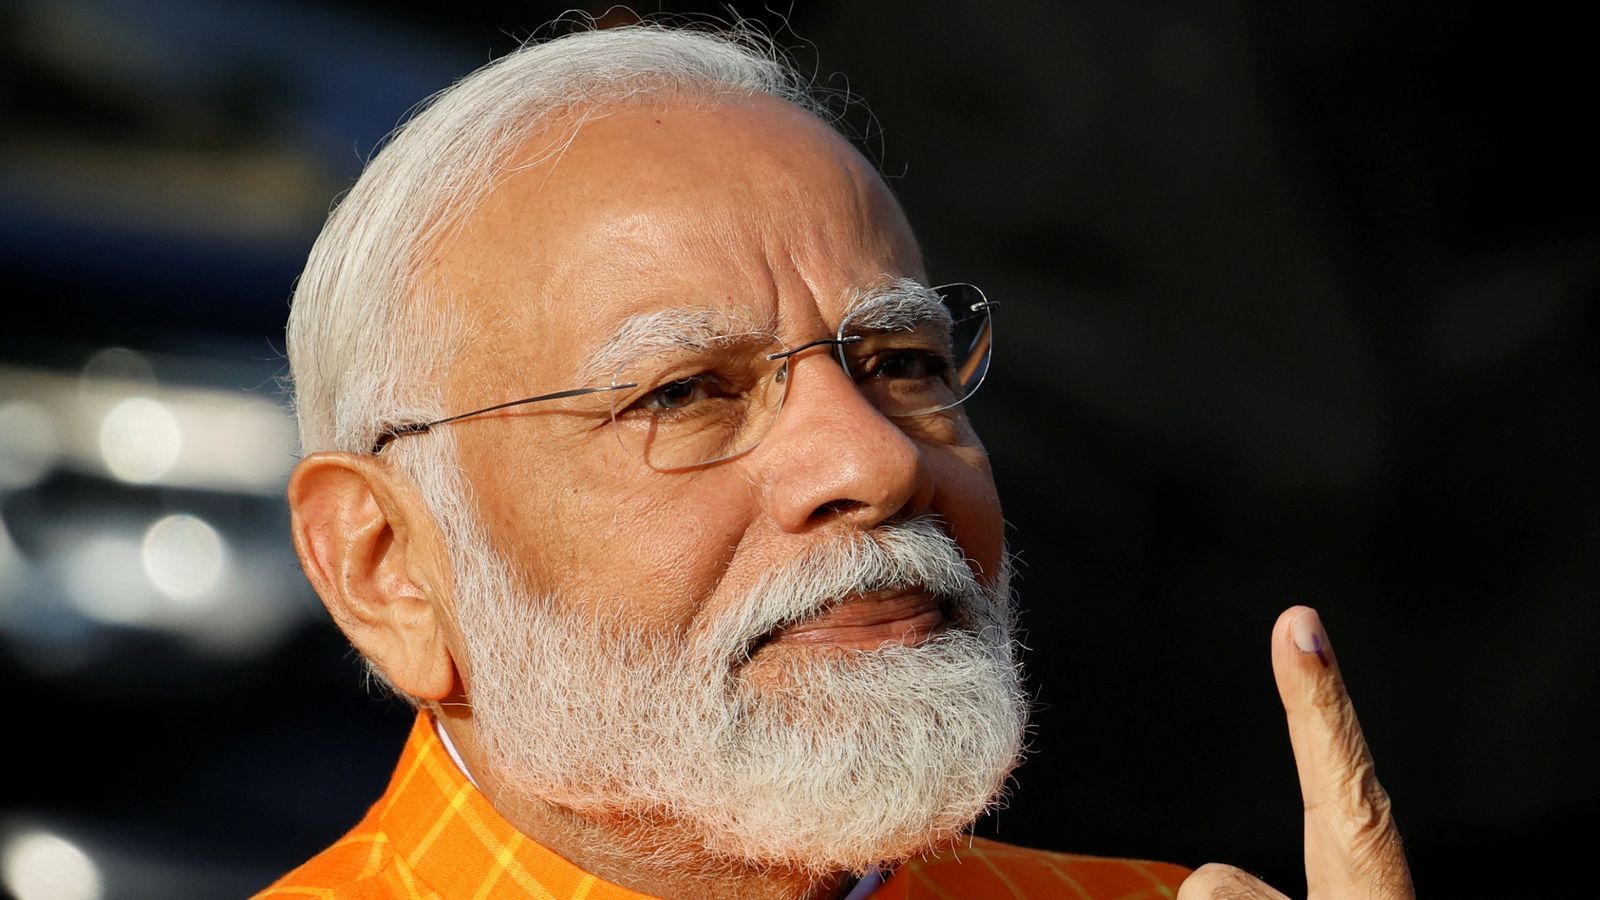 Modi casts vote in election as fears grow among India's Muslims